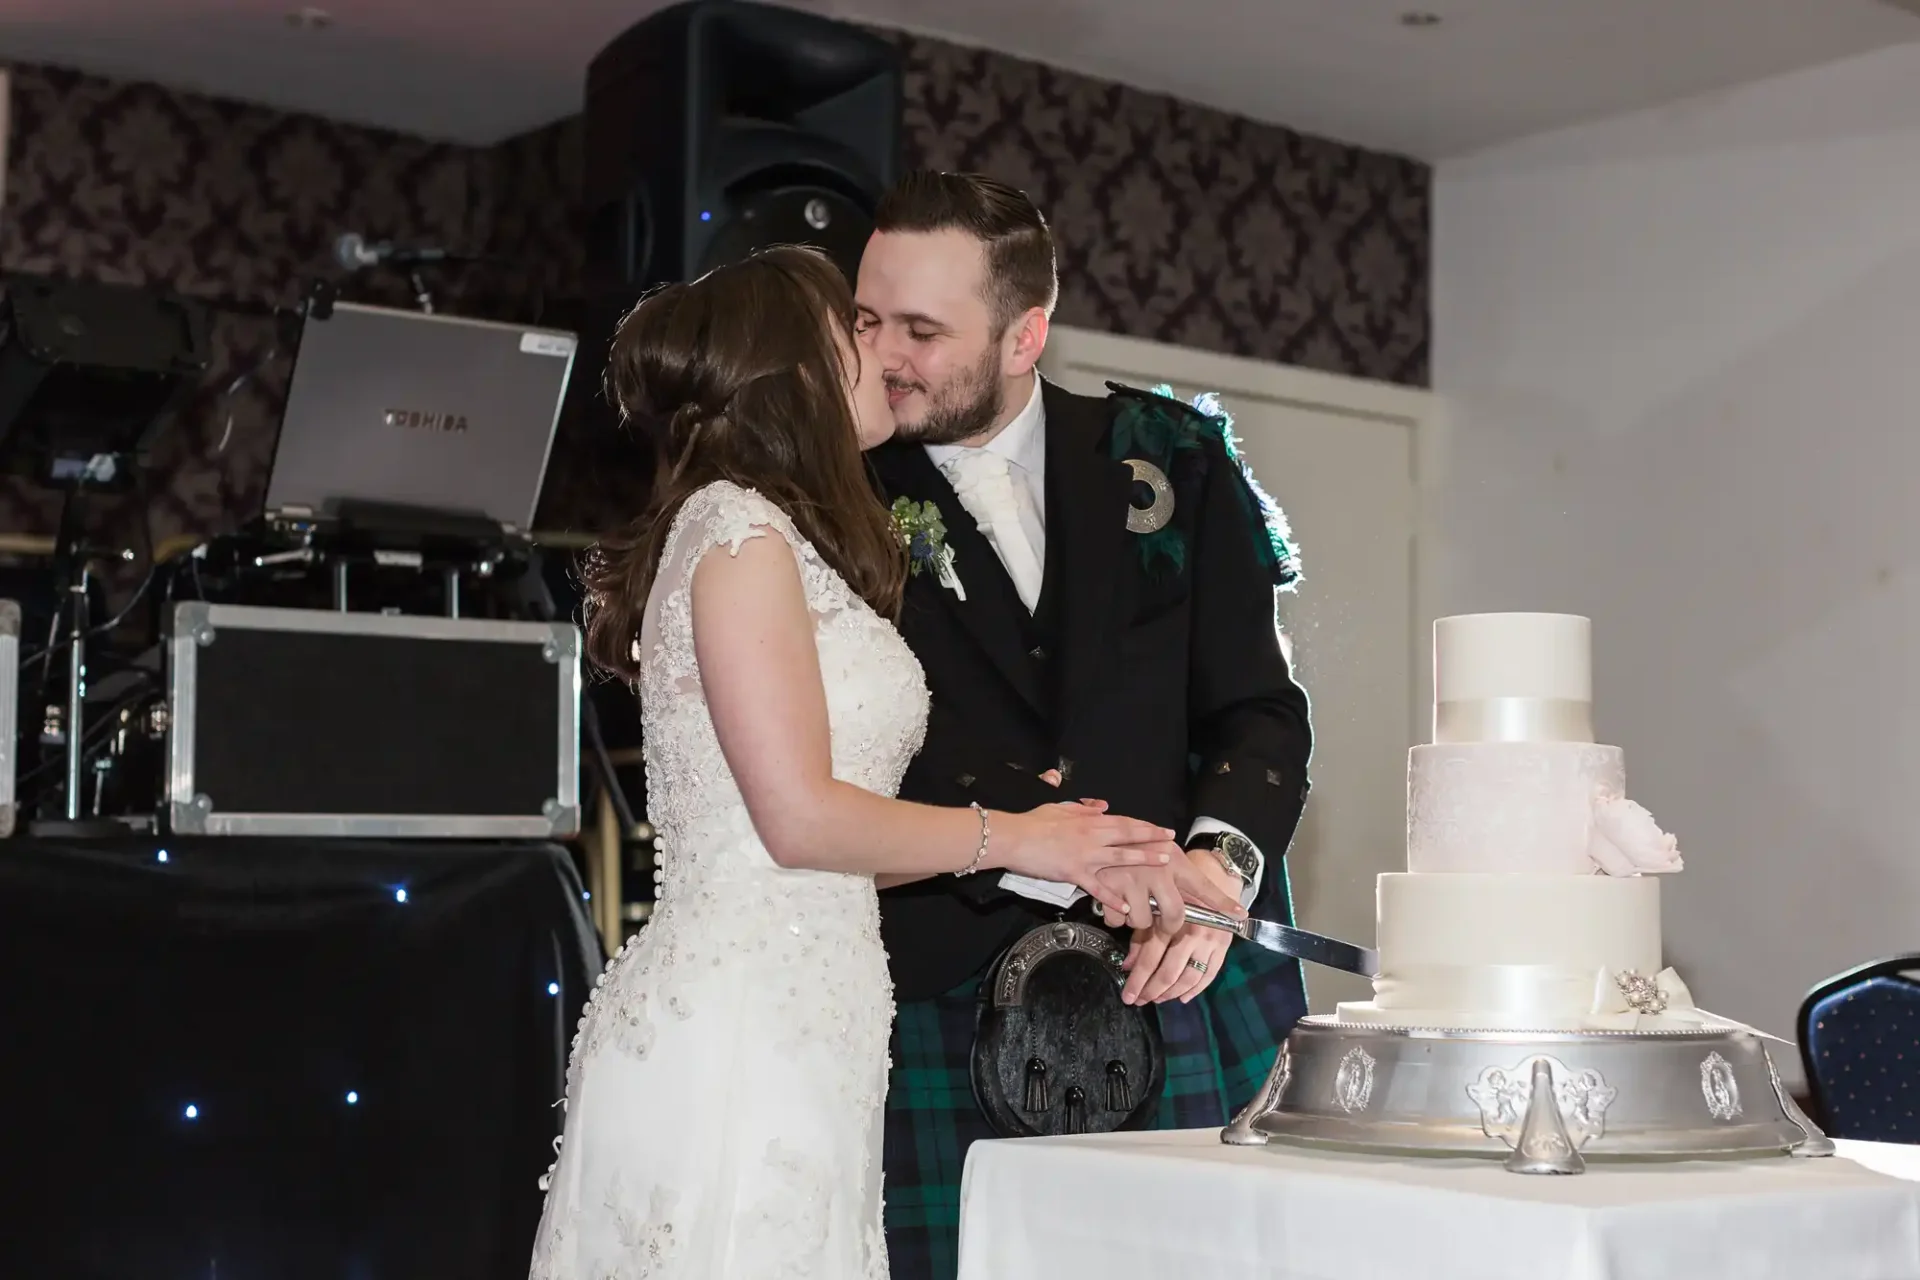 A bride and groom in a kilt cutting a wedding cake together at a reception.